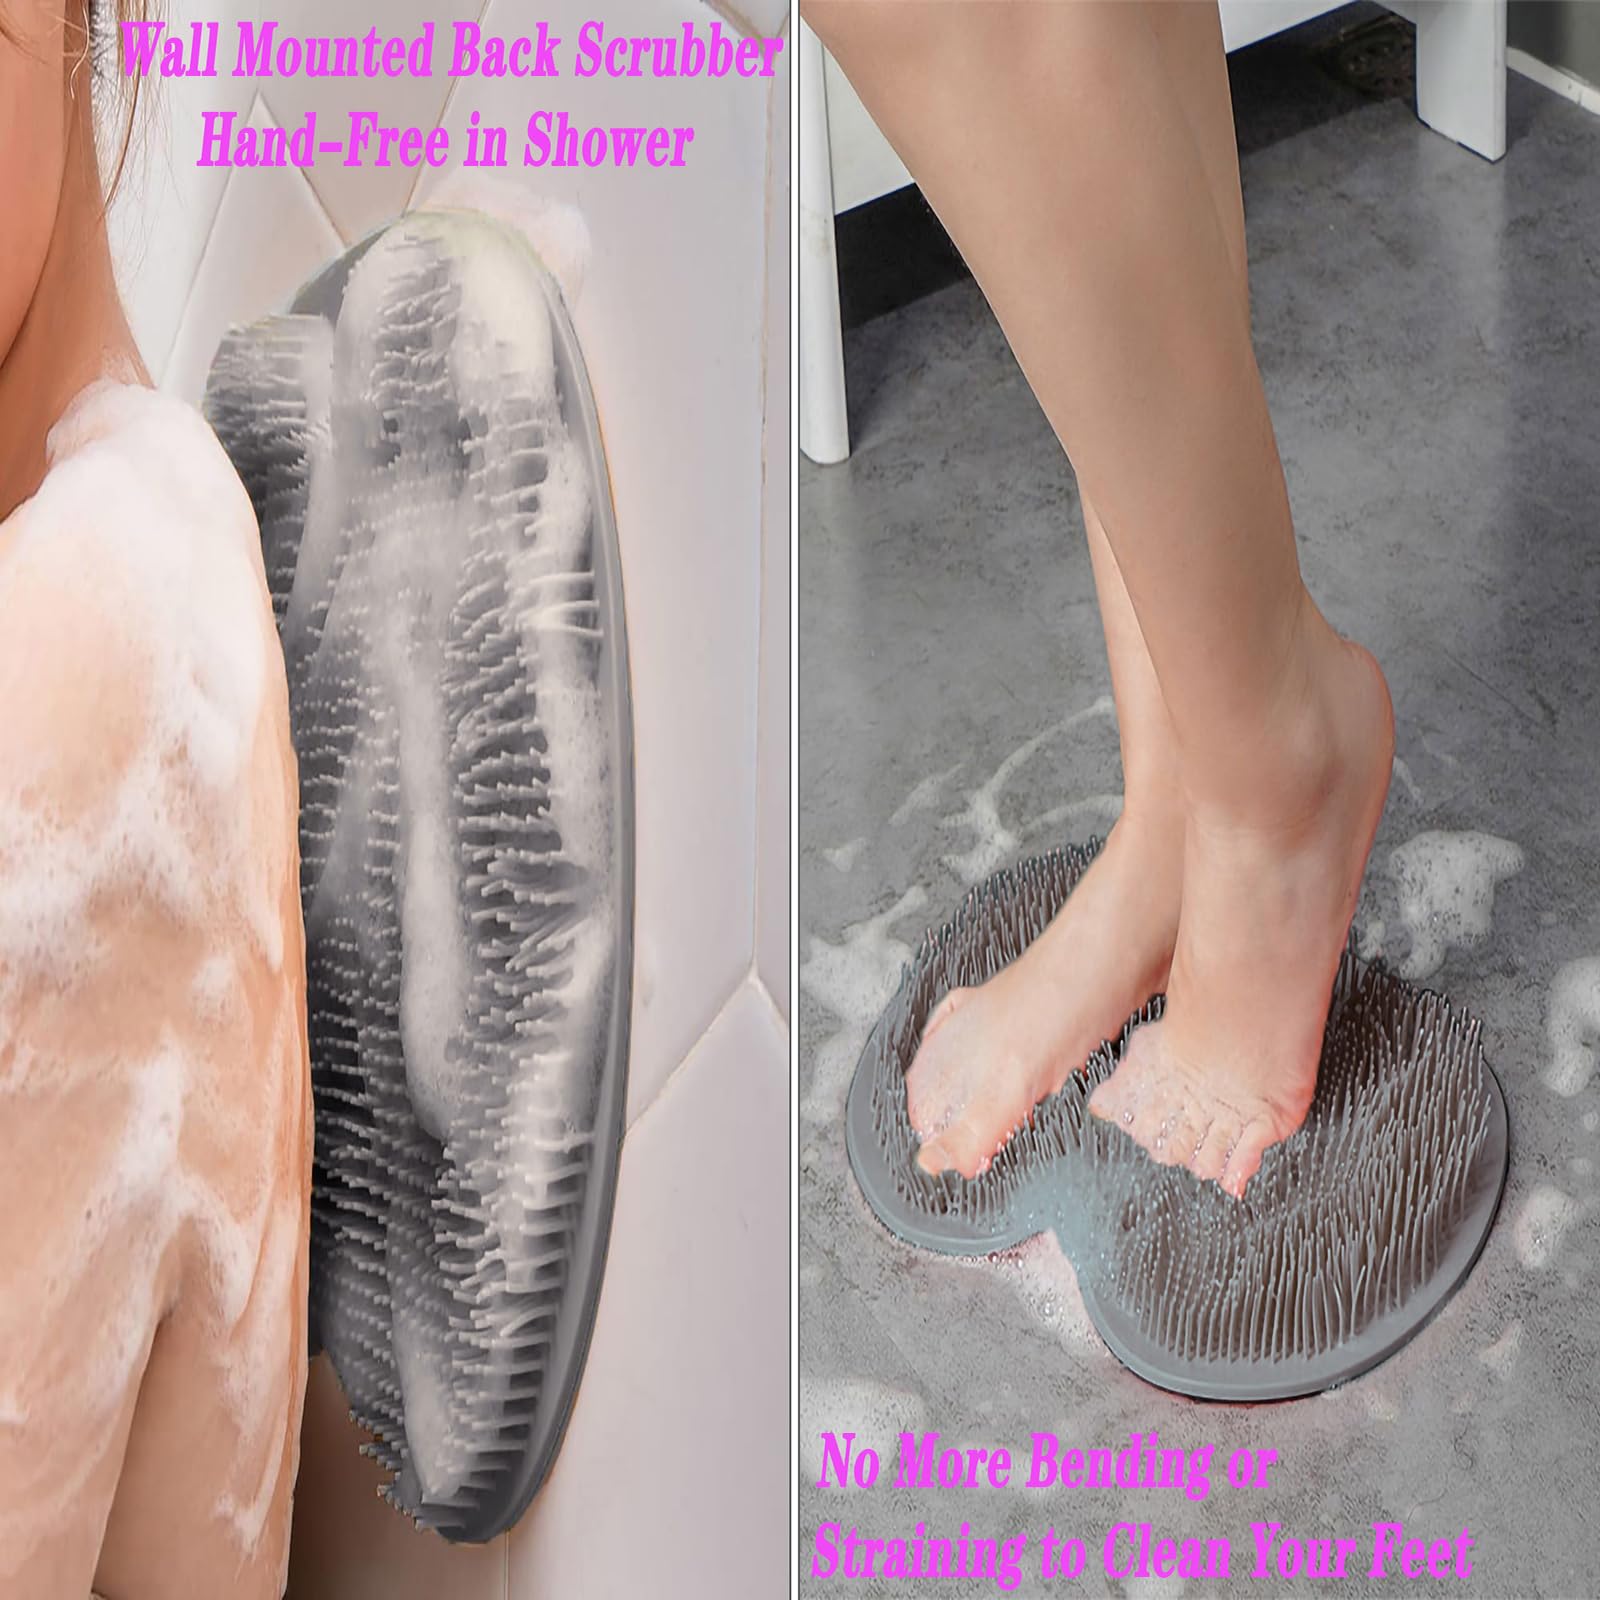 QIYIFAN Silicone Shower Foot Scrubber Mat Back Washer Exfoliating Bath Wash Pad Wall Mounted Non-Slip Suction Cups for Use in Cleaner Men and Women Grey